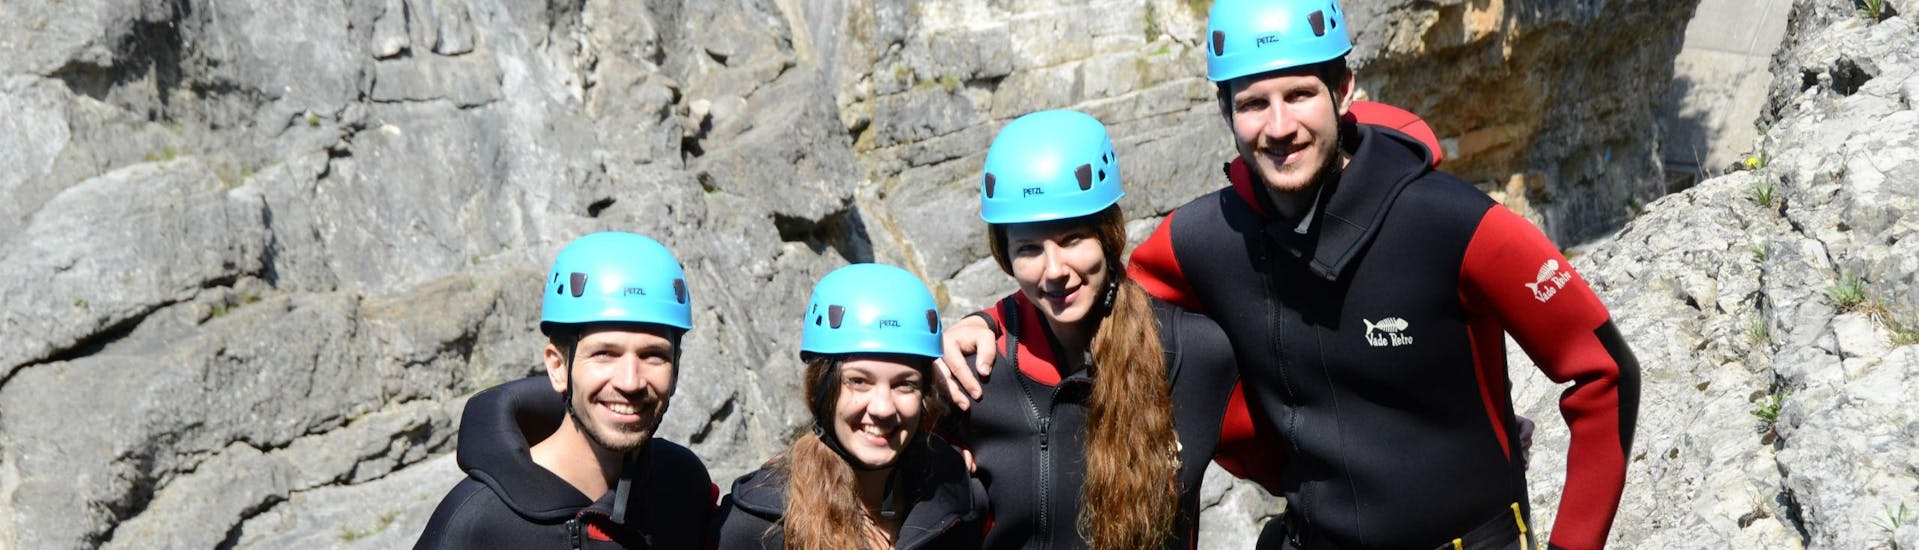 A group of friends is posing for a group photo while on a canyoning tour.